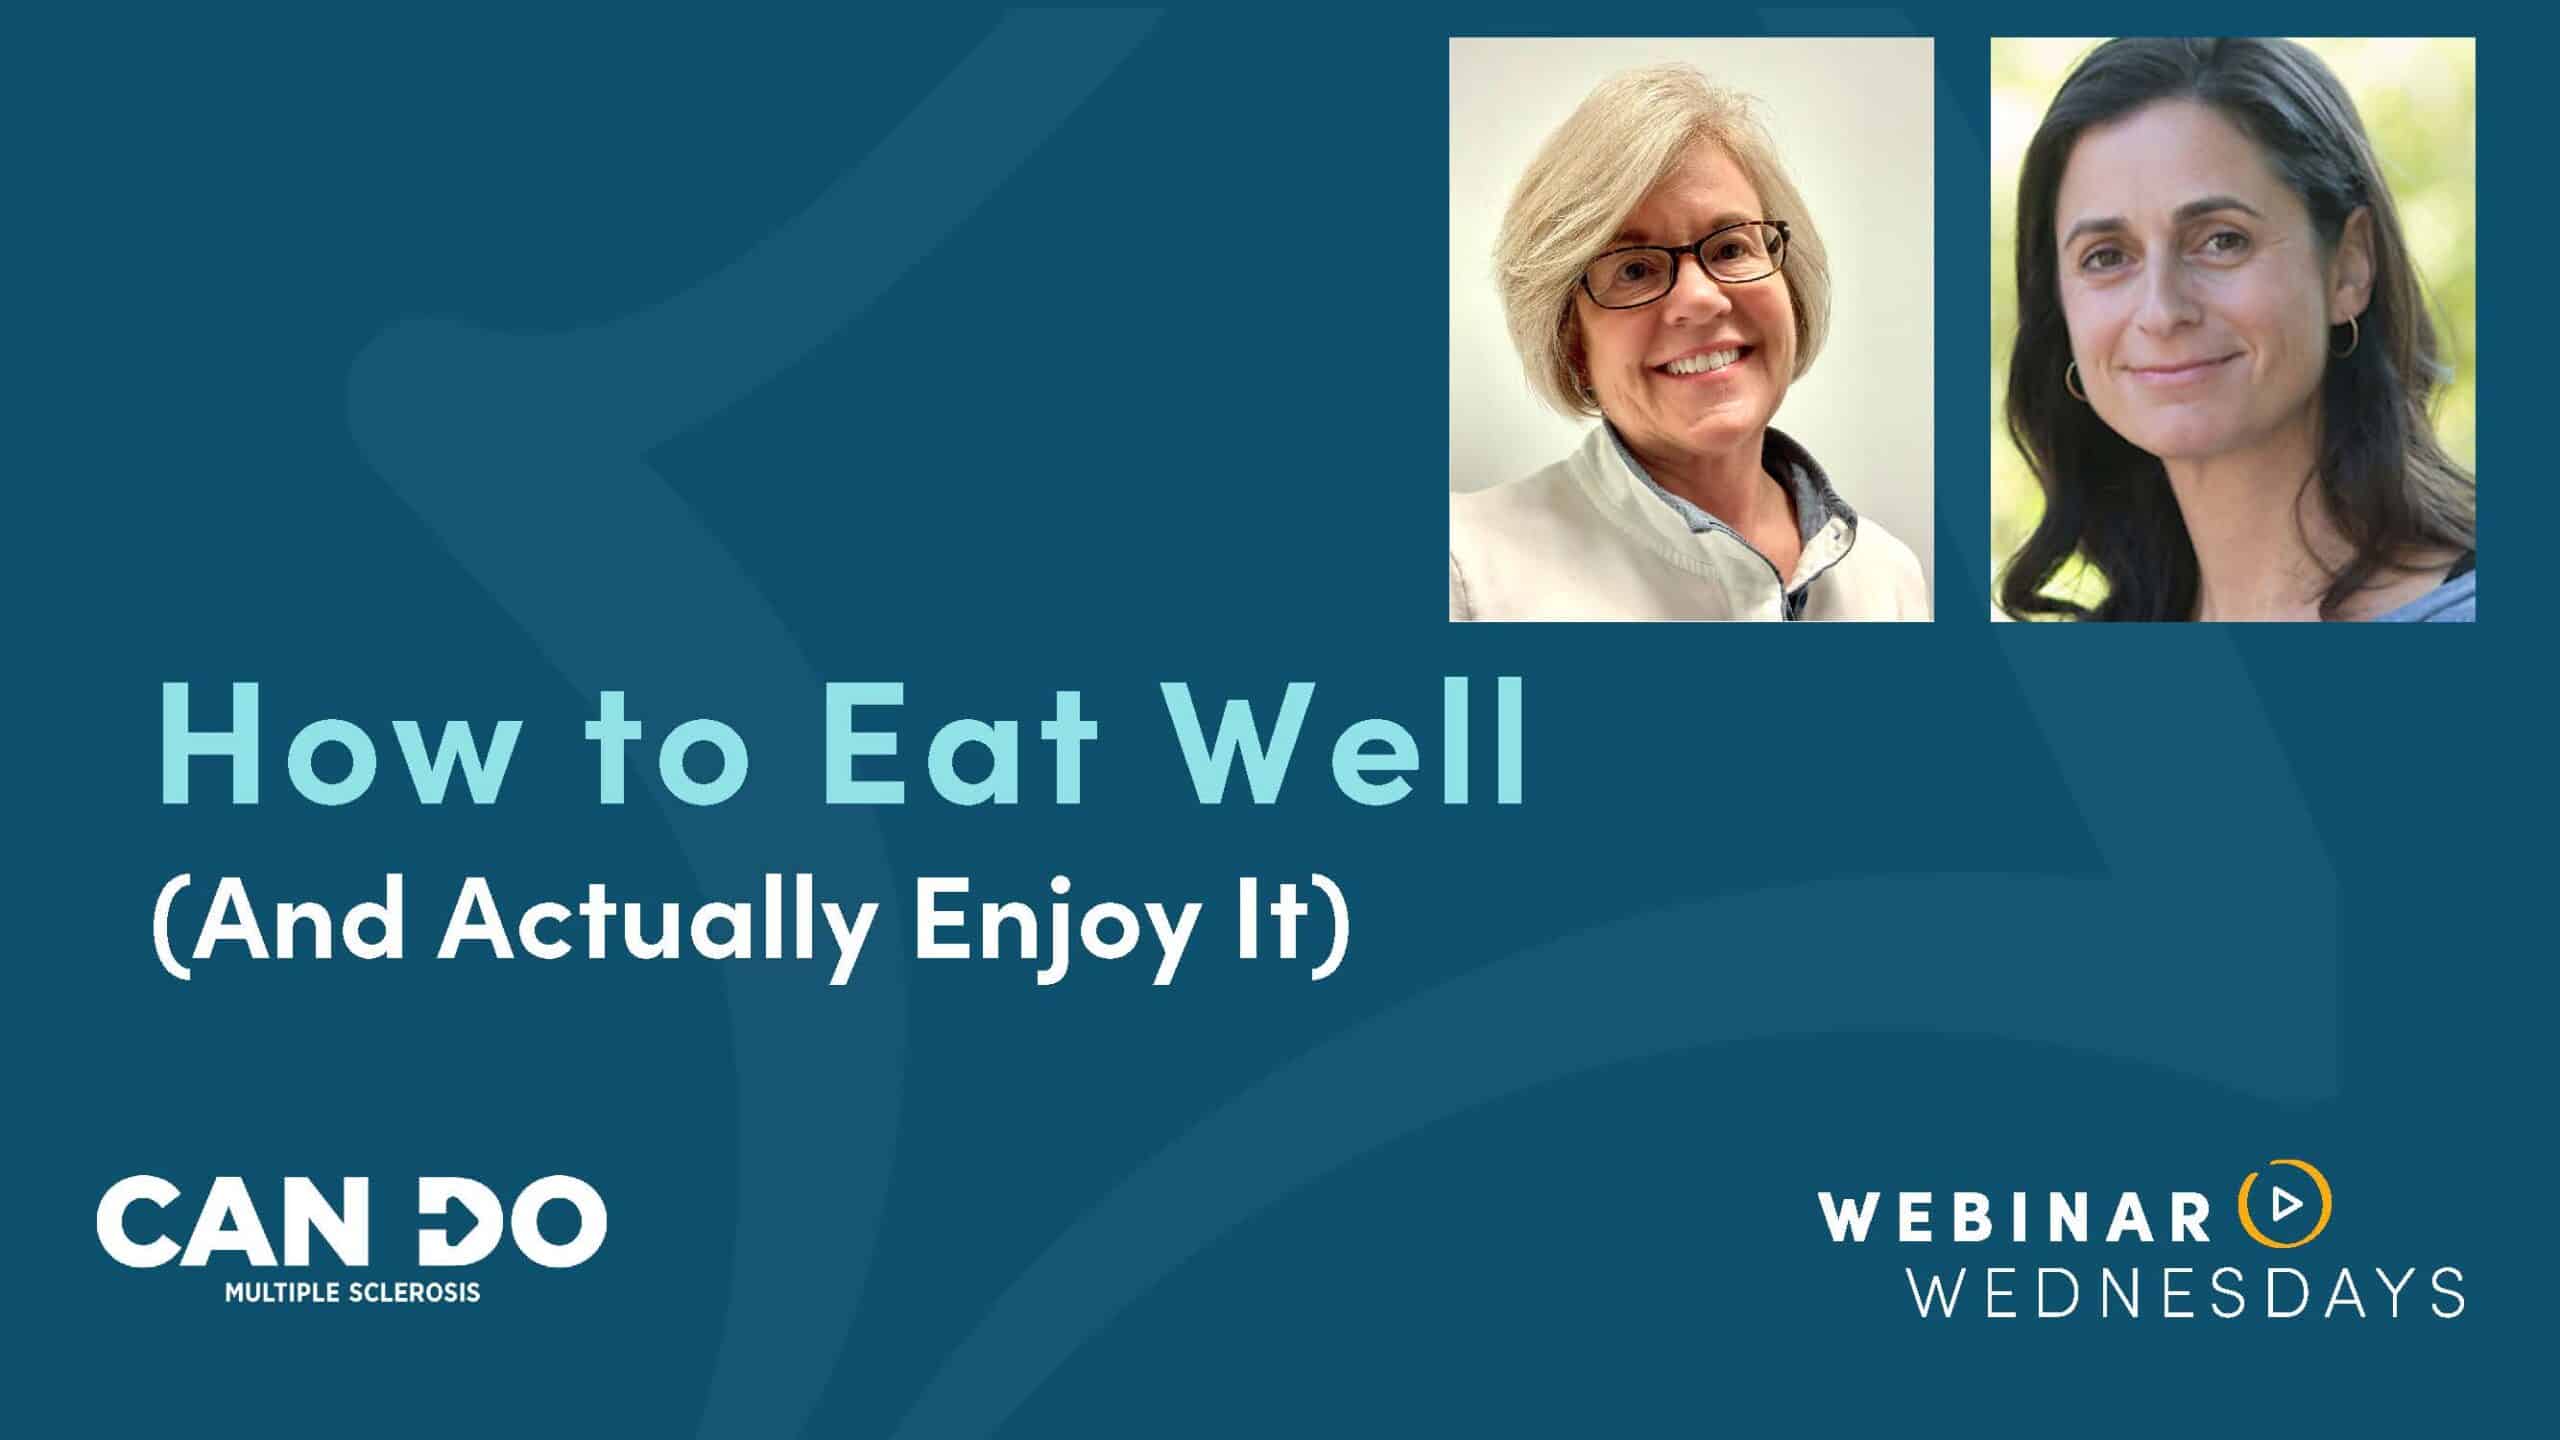 January 2022_How to eat well and actually enjoy it